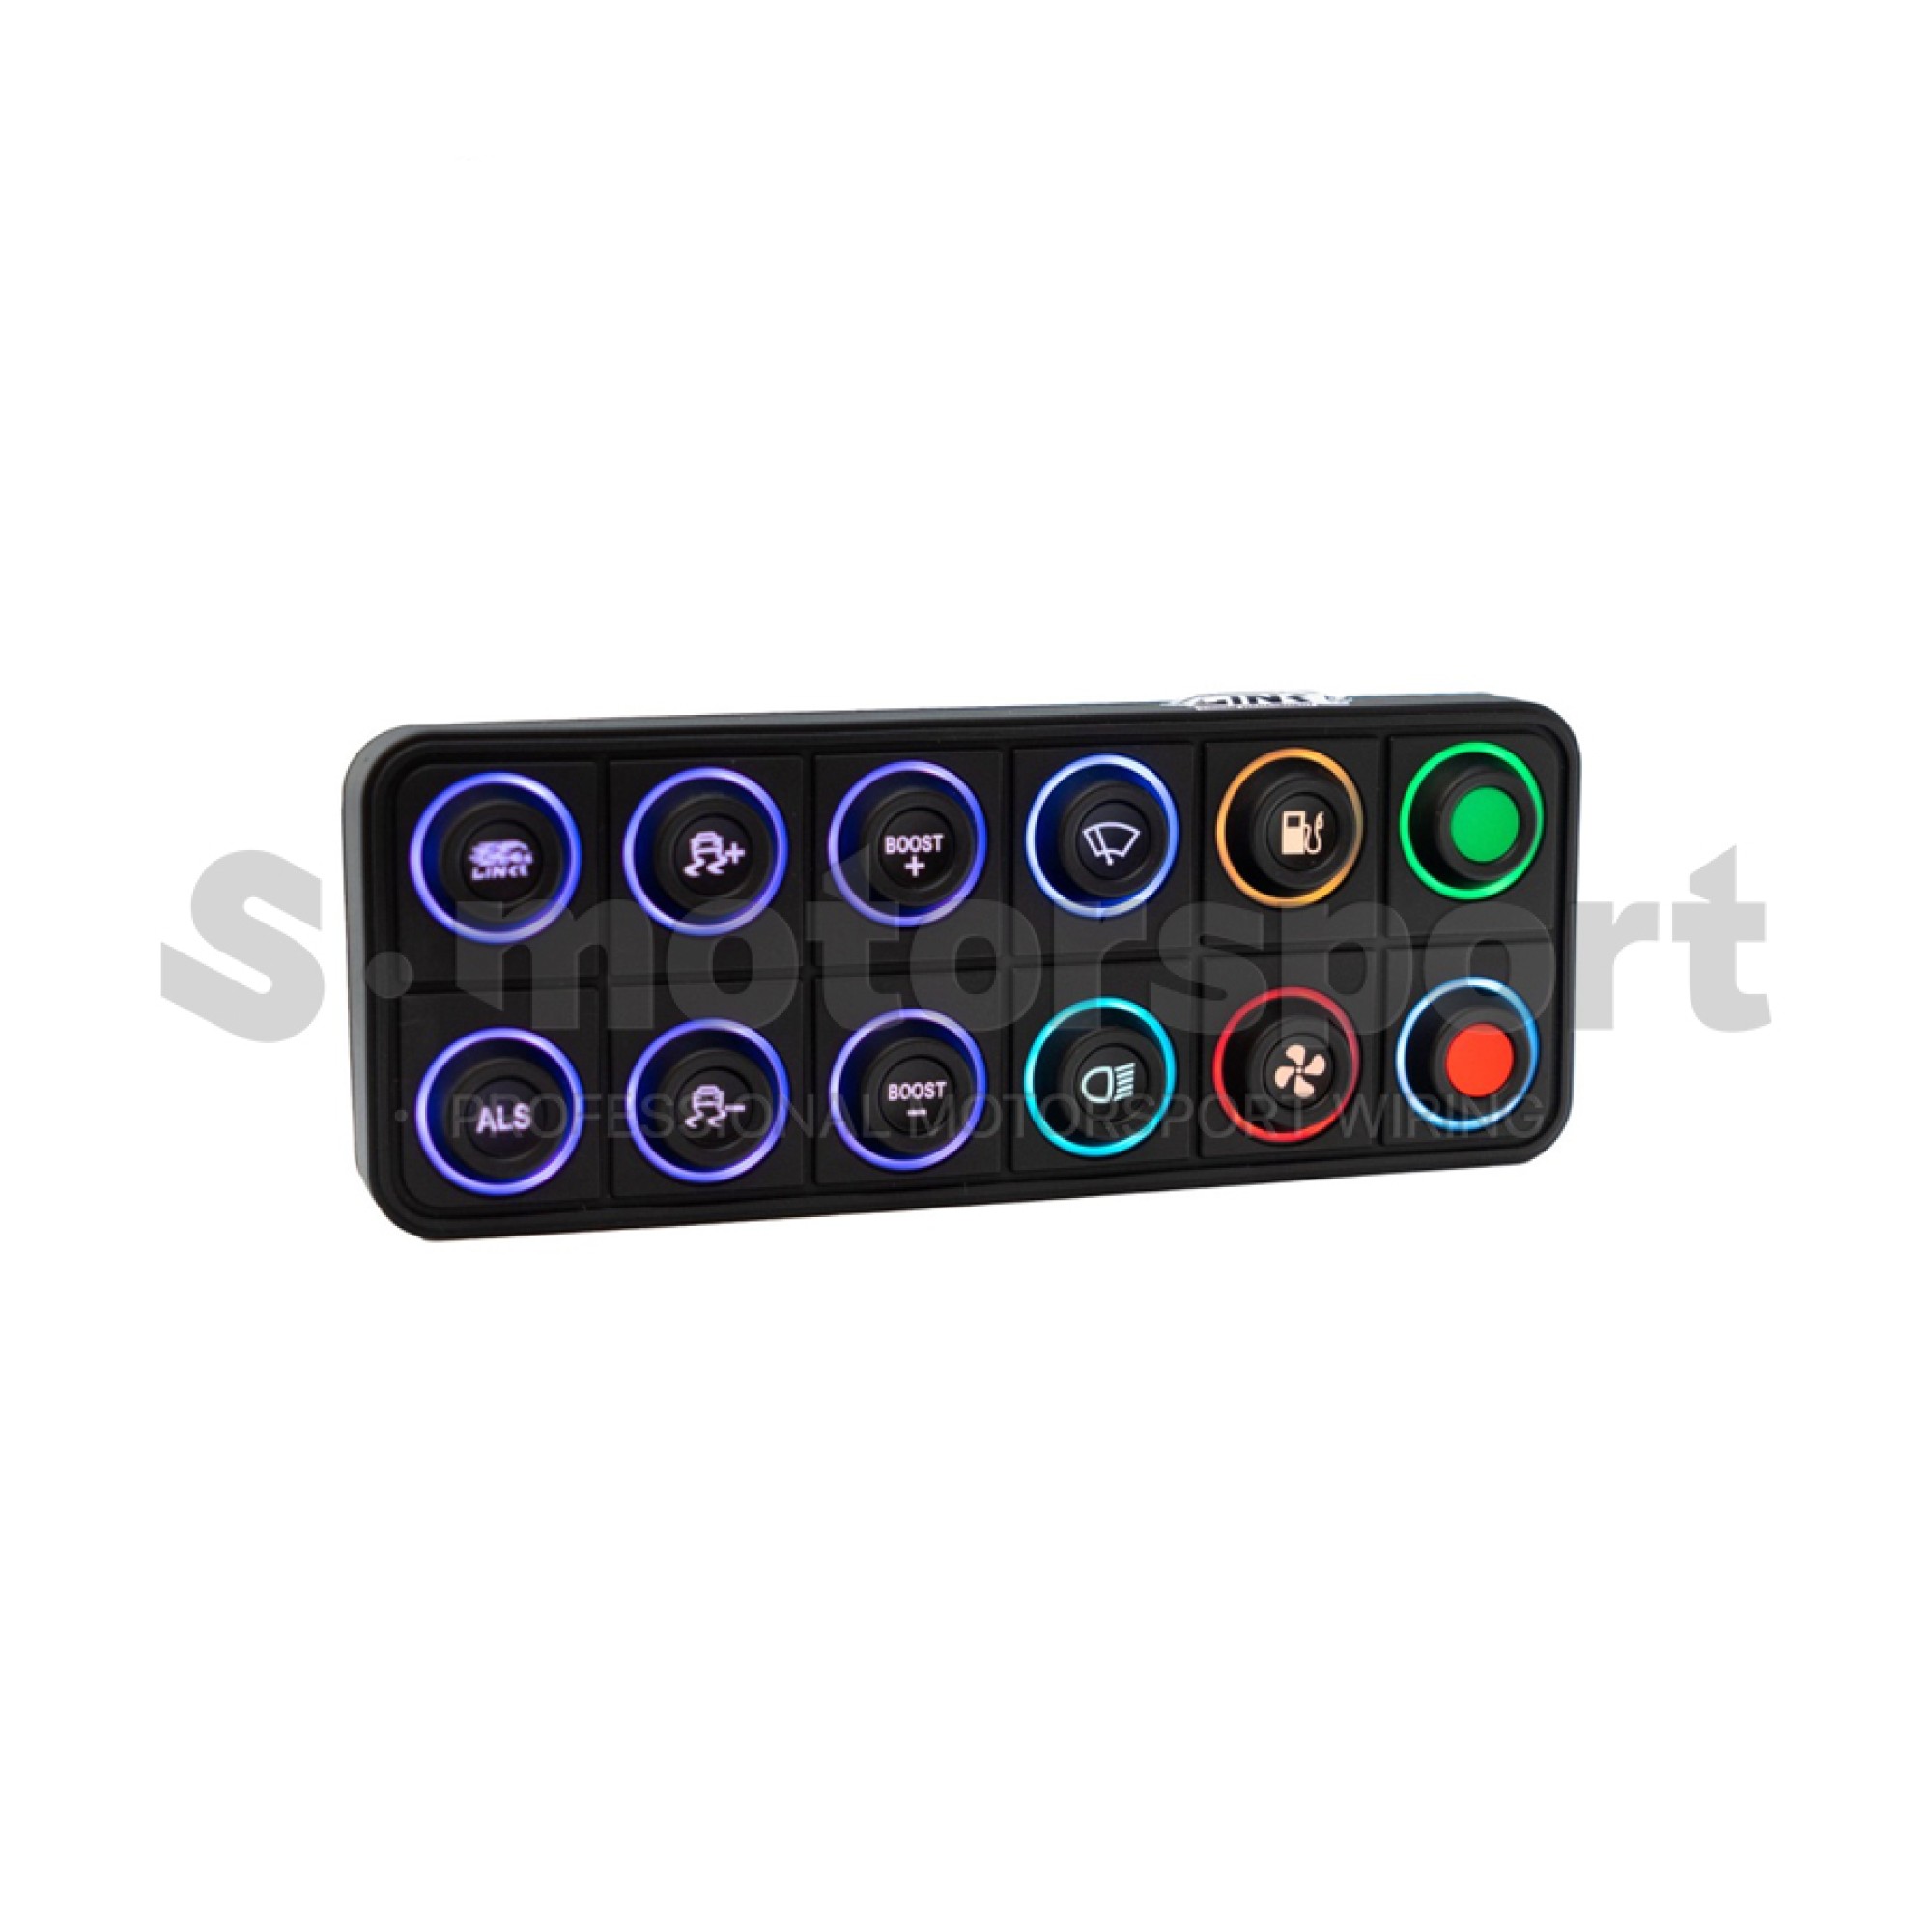 Link CAN Keypad 12 Button